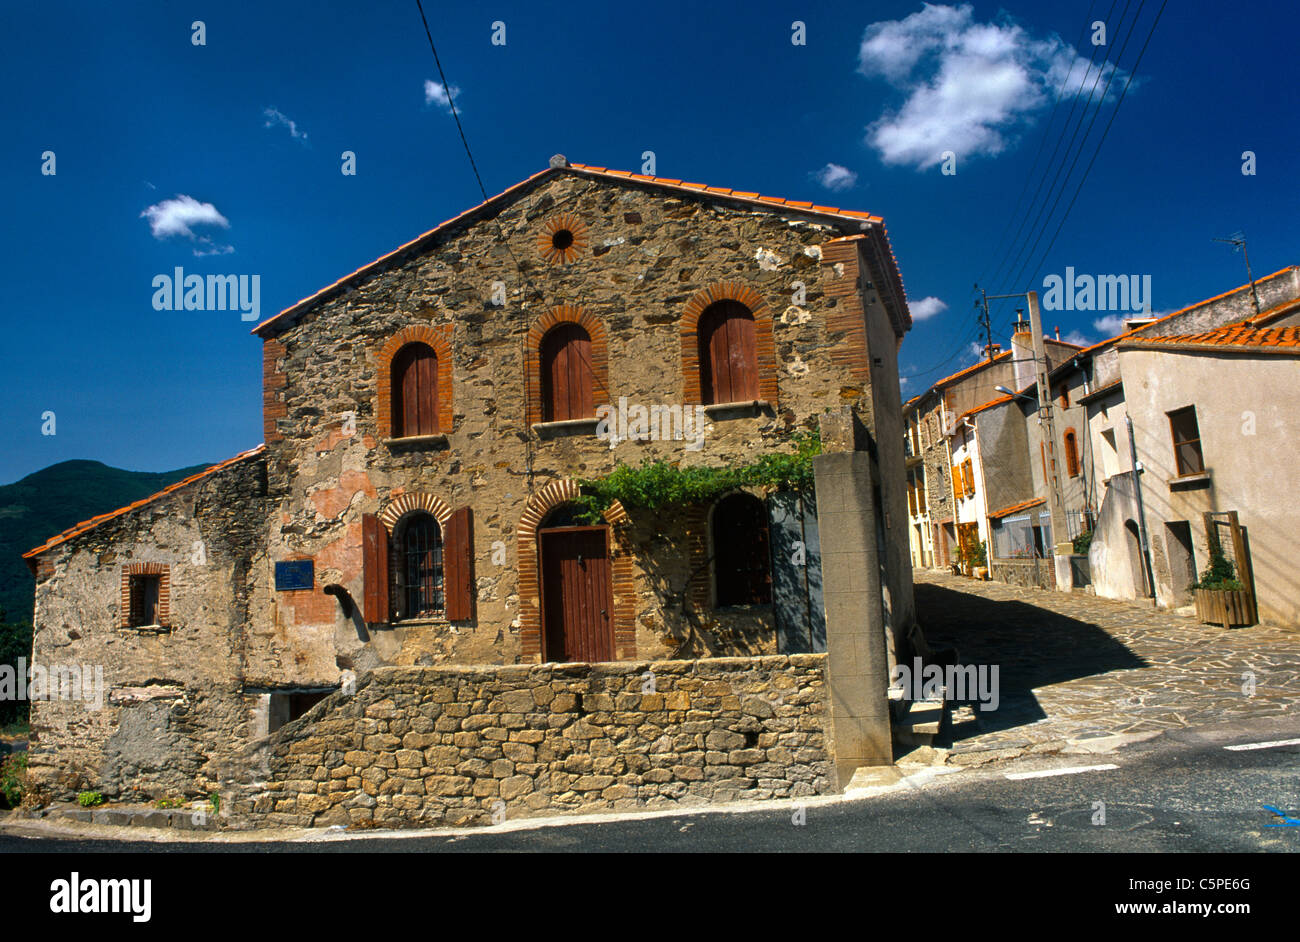 St Marsal France Languedoc-Roussillon Town Houses And Road Stock Photo